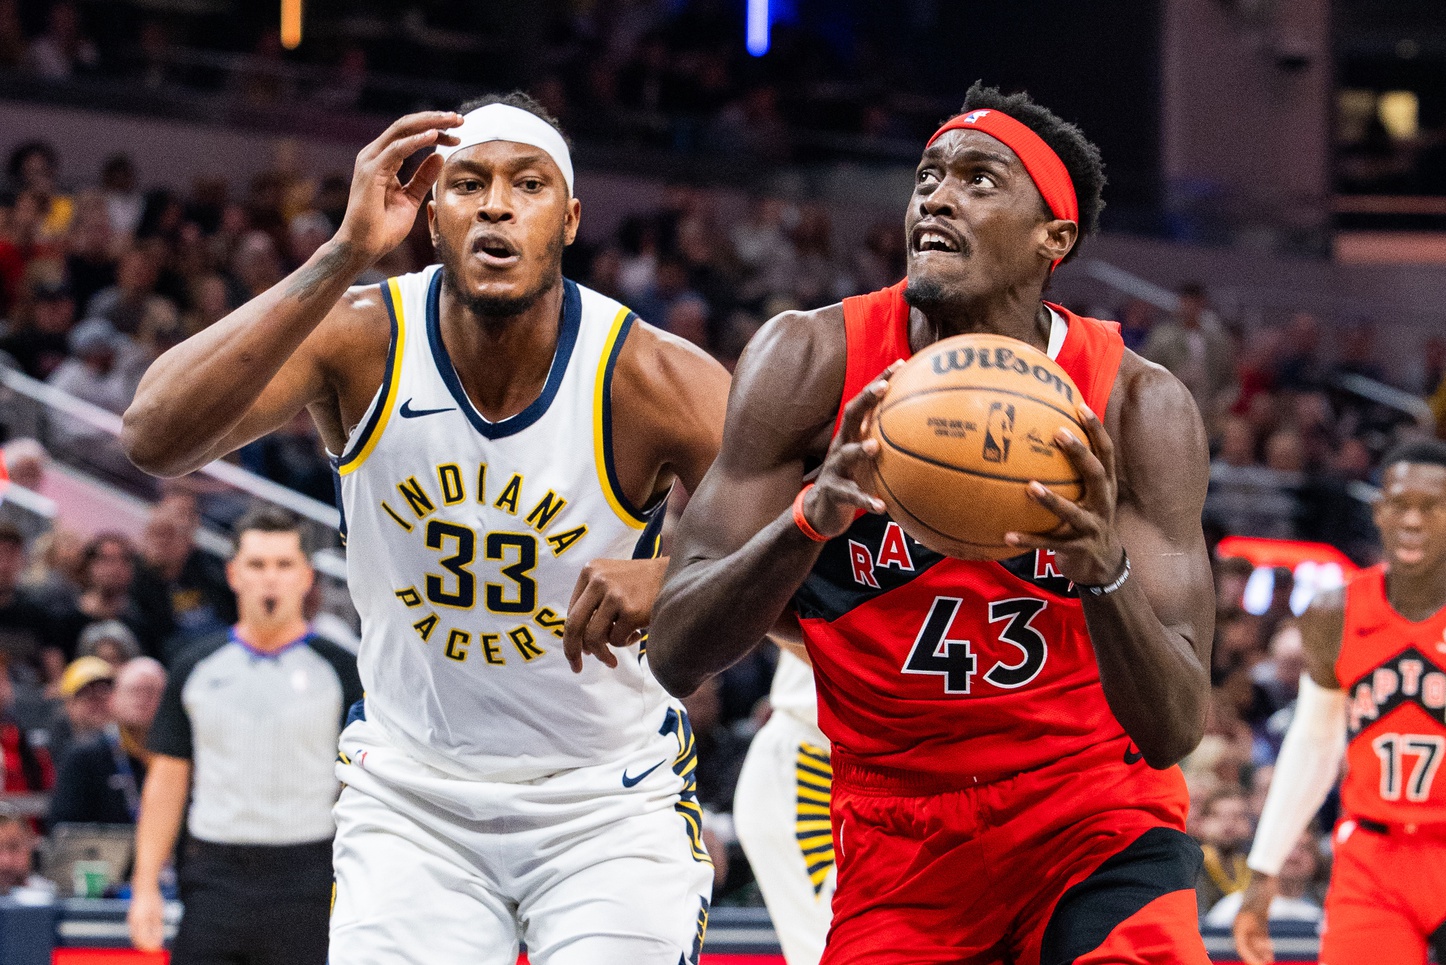 Insider Reveals Pacers Player Likely Excluded in Siakam Deal Sports